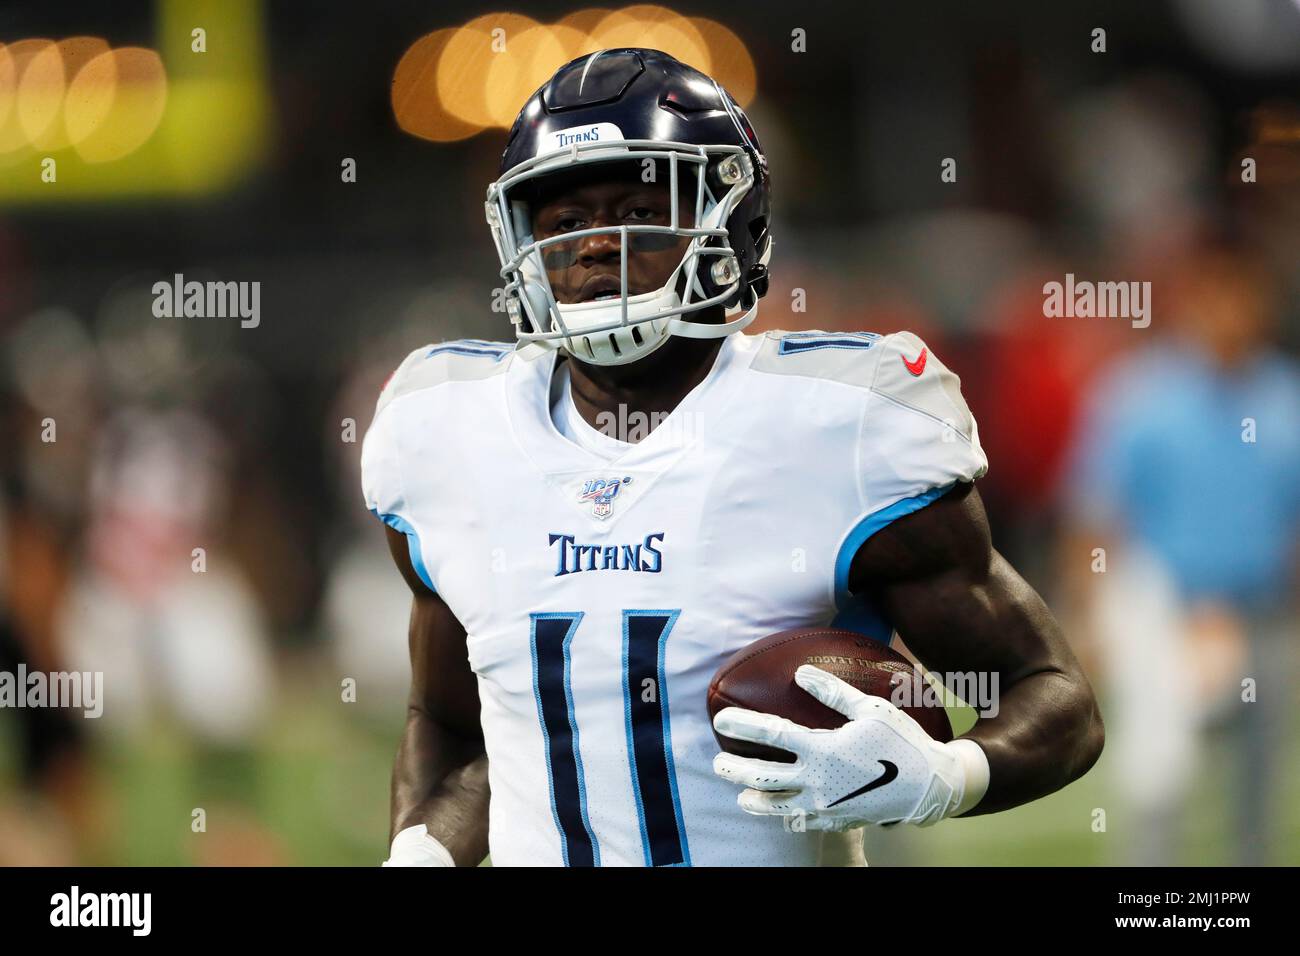 11 tennessee titans